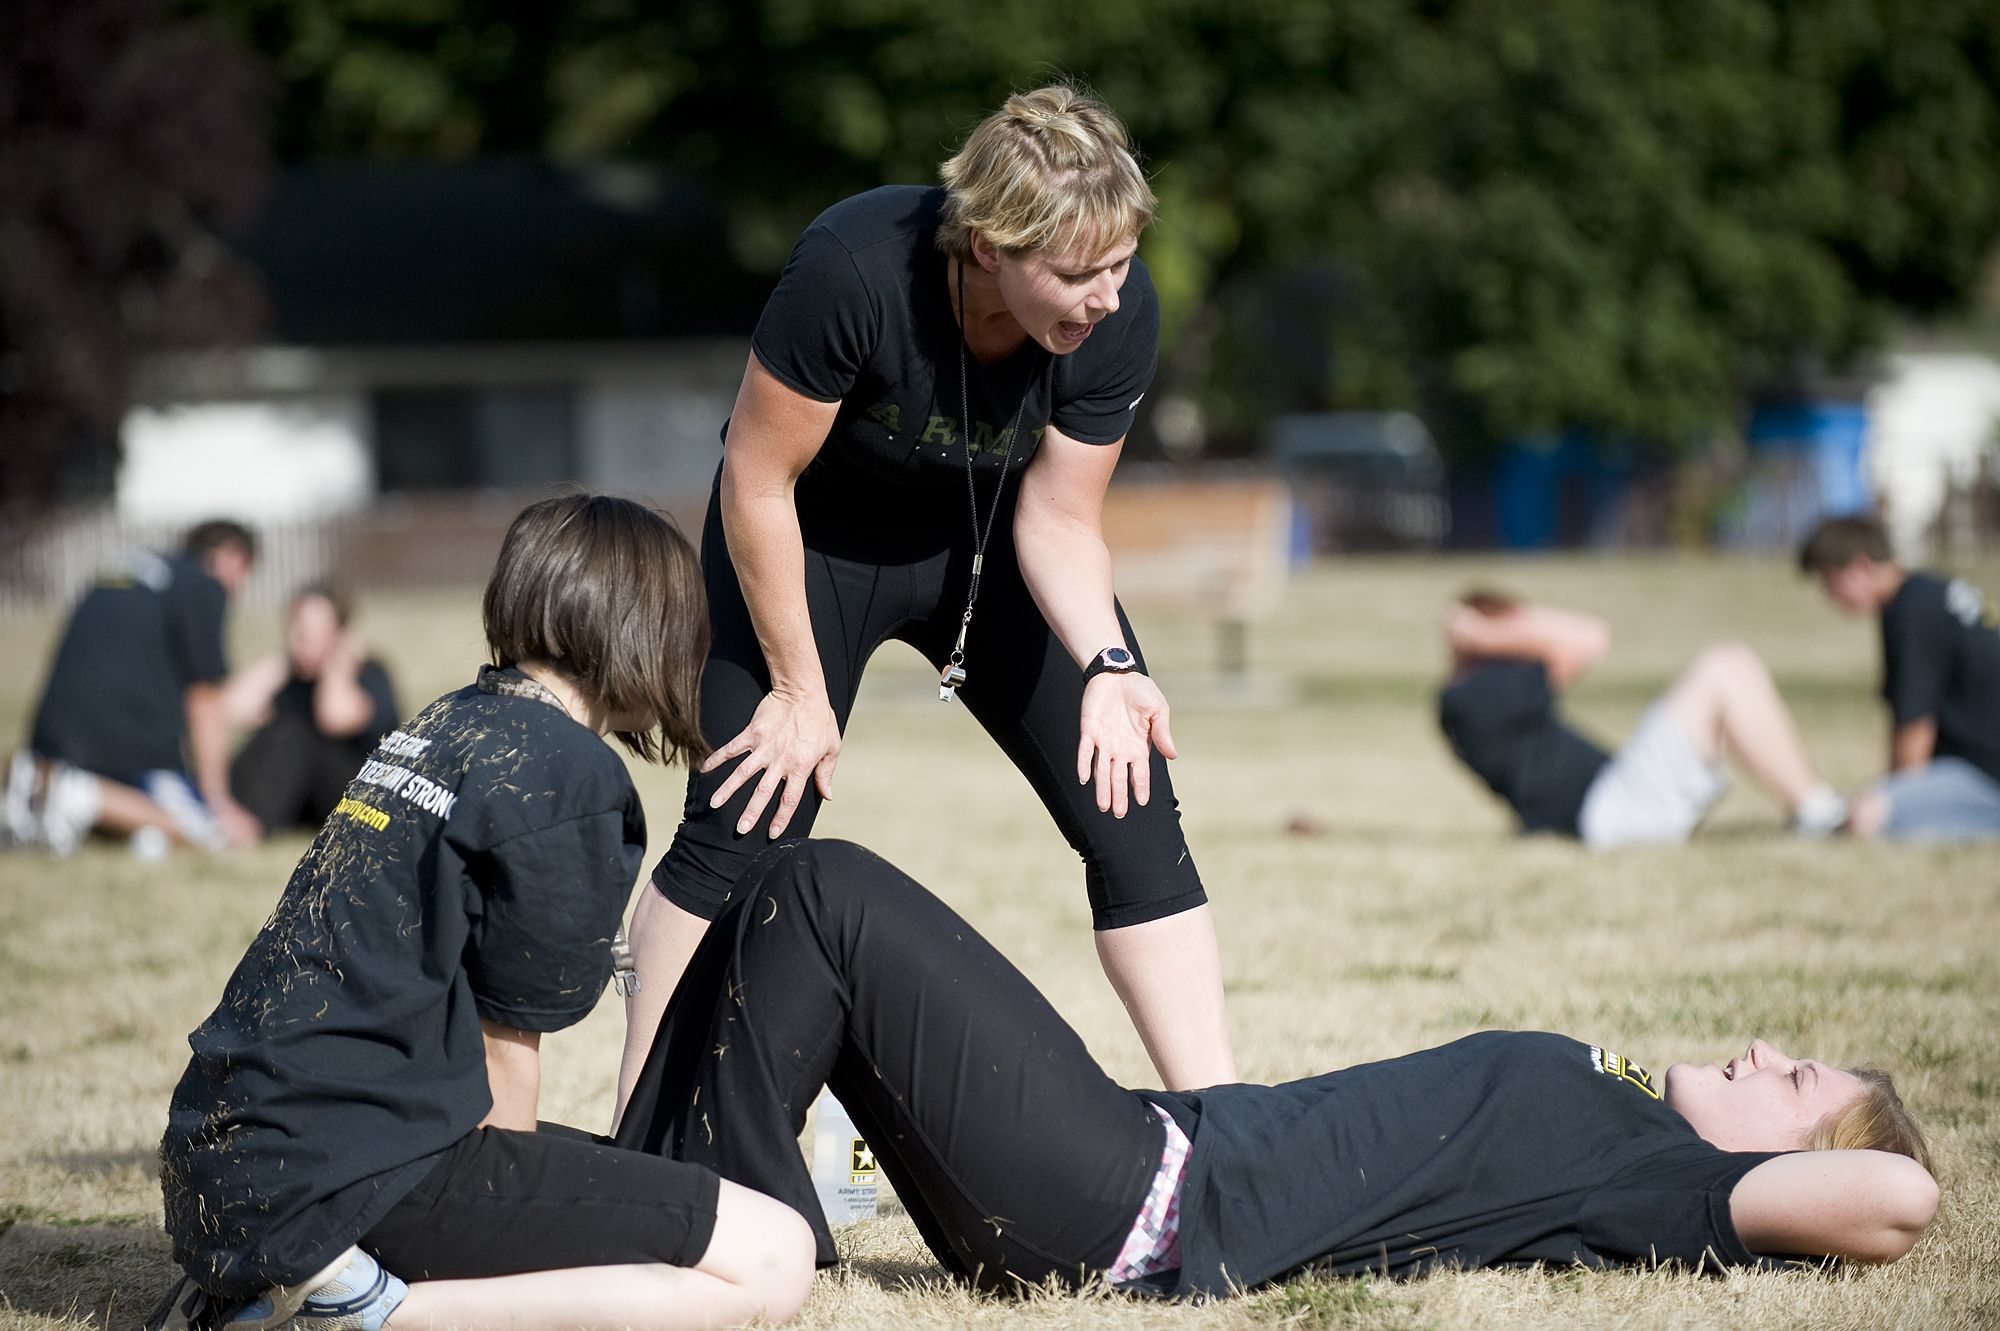 Pfc. Lee Kershaw, center, works with new recruits Ranee Watkins, 23, left, and Renee Costello, 20, during the physical training Thursday. Kershaw volunteers her time once a week to mentor recruits in the Army's Future Soldiers program.